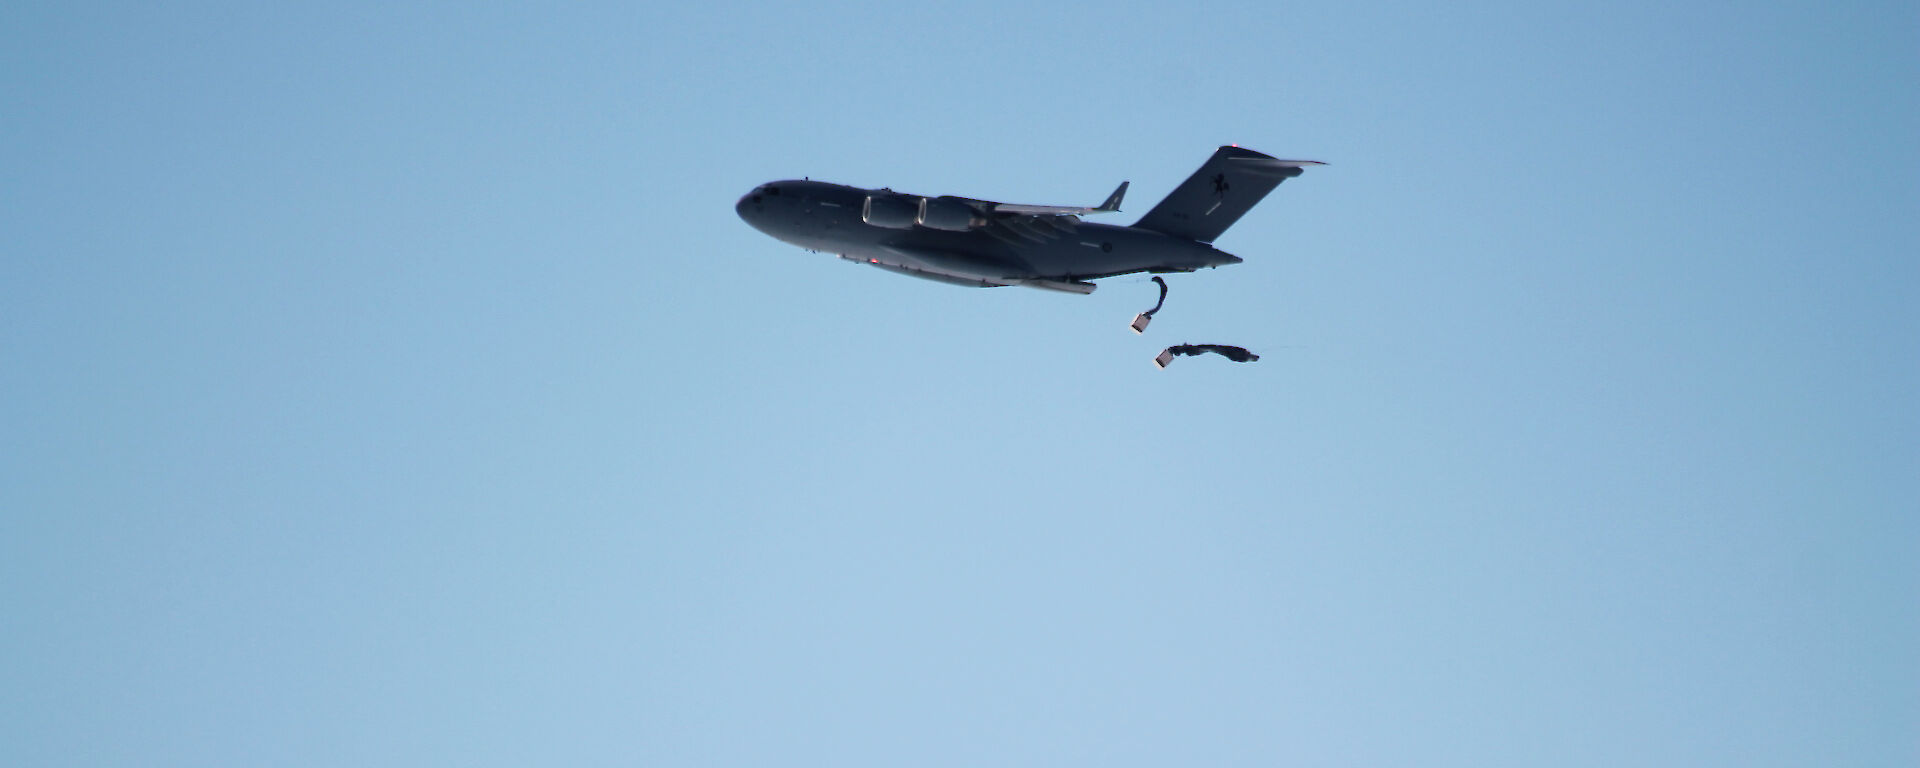 Two parachutes being deployed from a plane